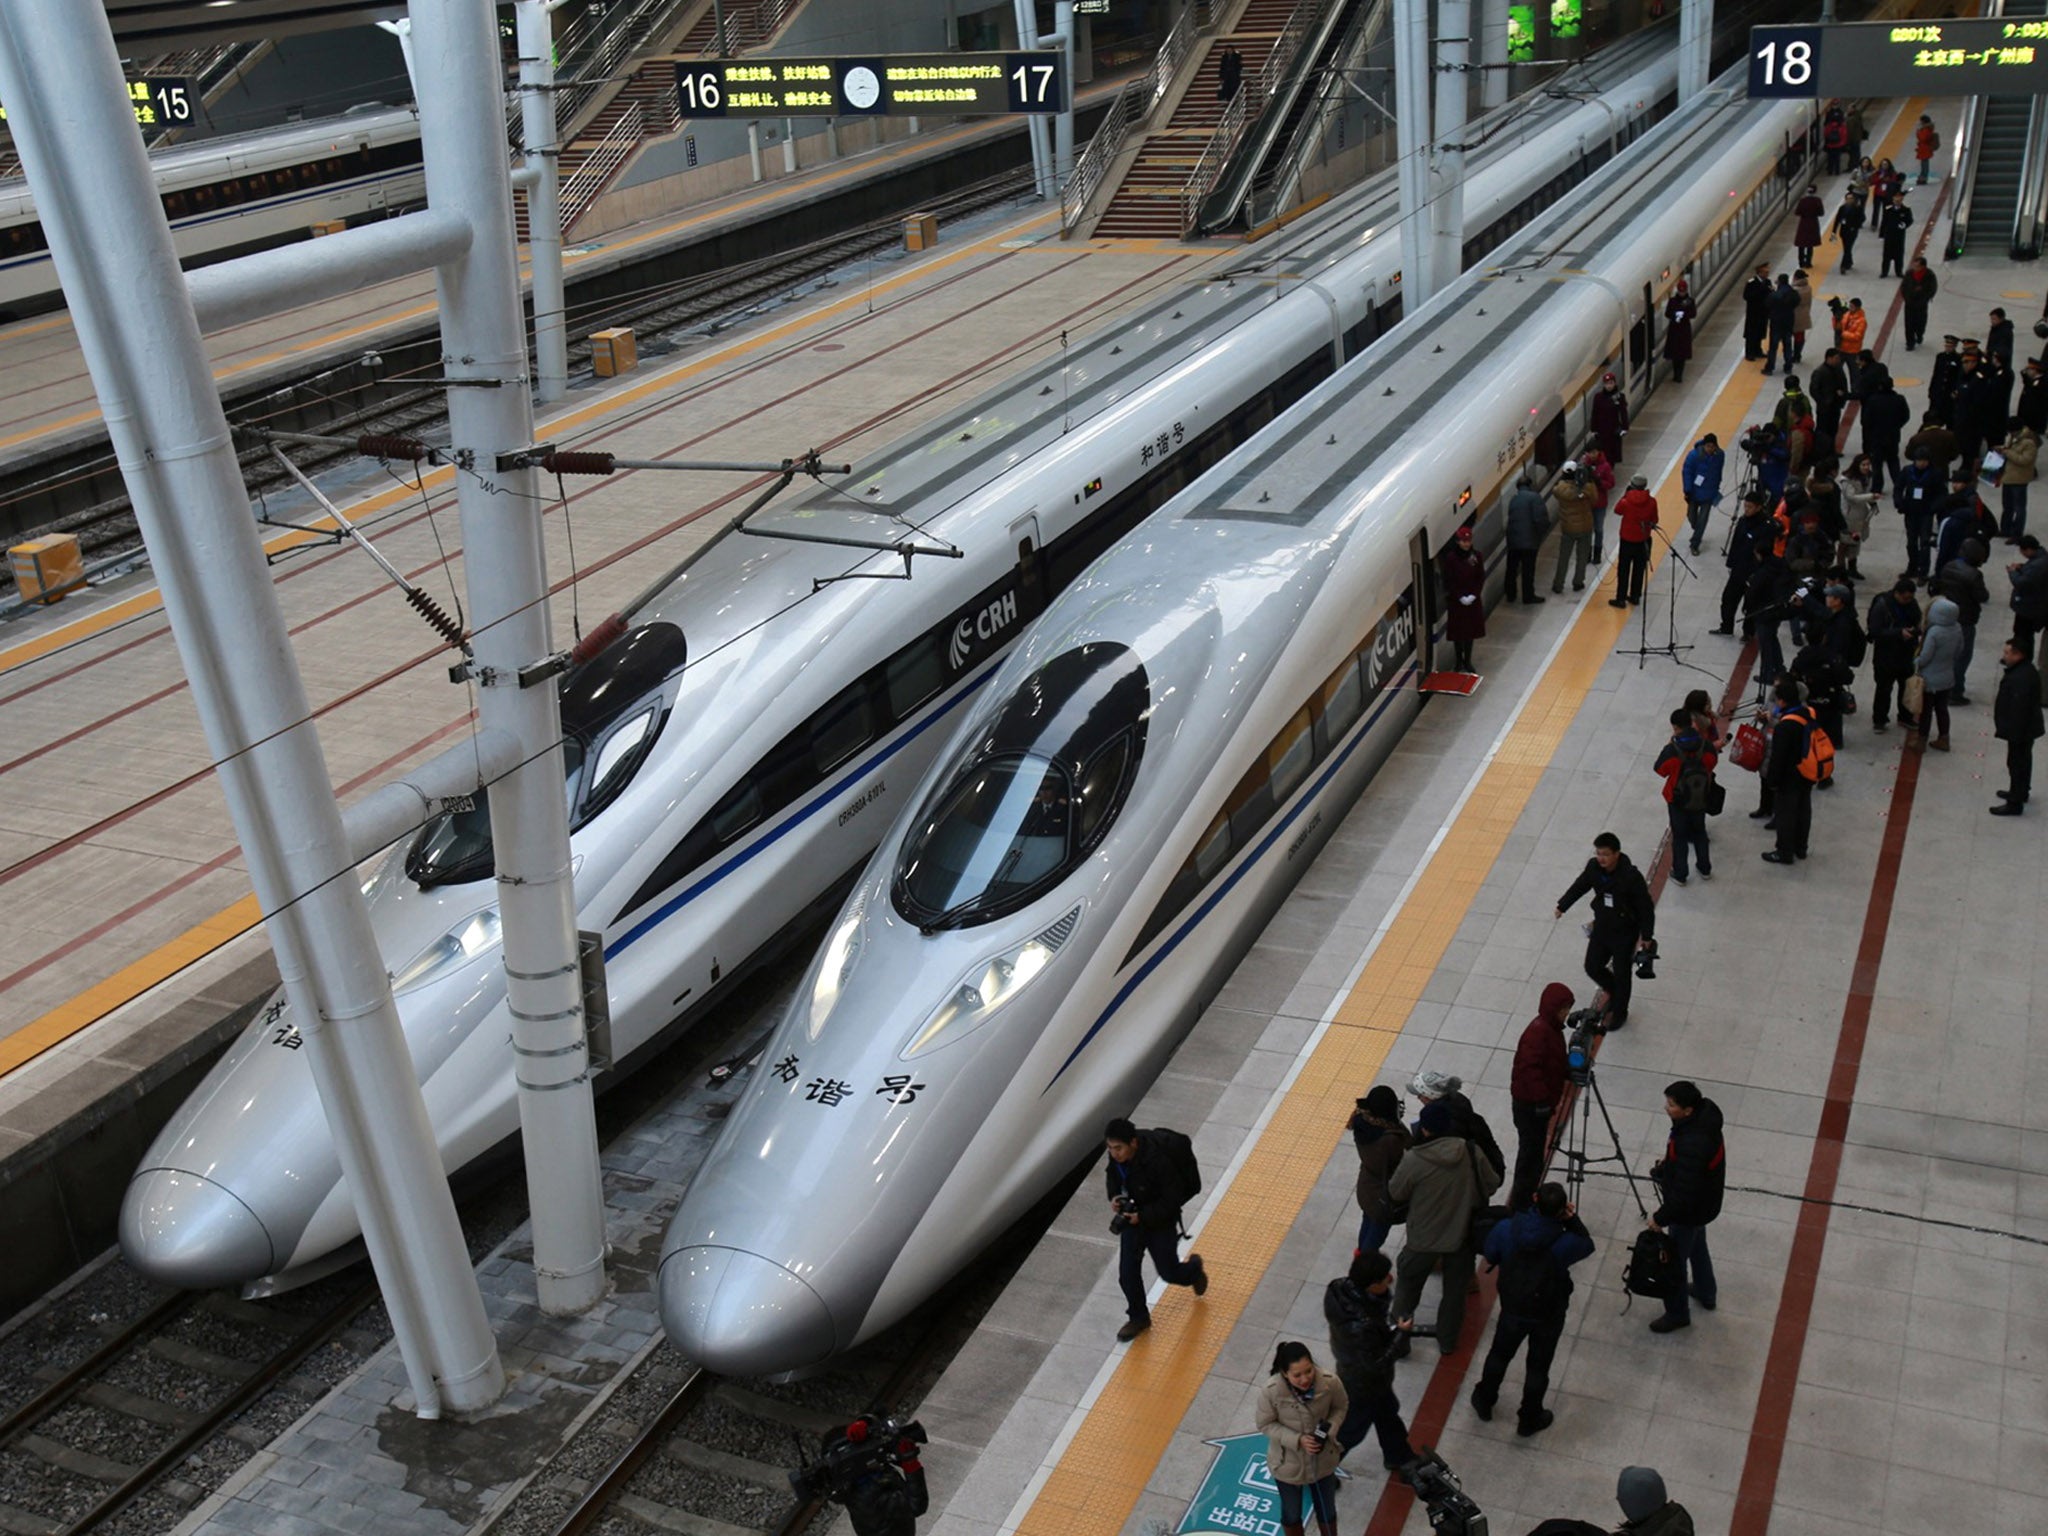 Trains stand in Beijing railway station preparing to set off on the world's longest high-speed rail route which travels 1,425-miles to Guangzhou in the south of the country